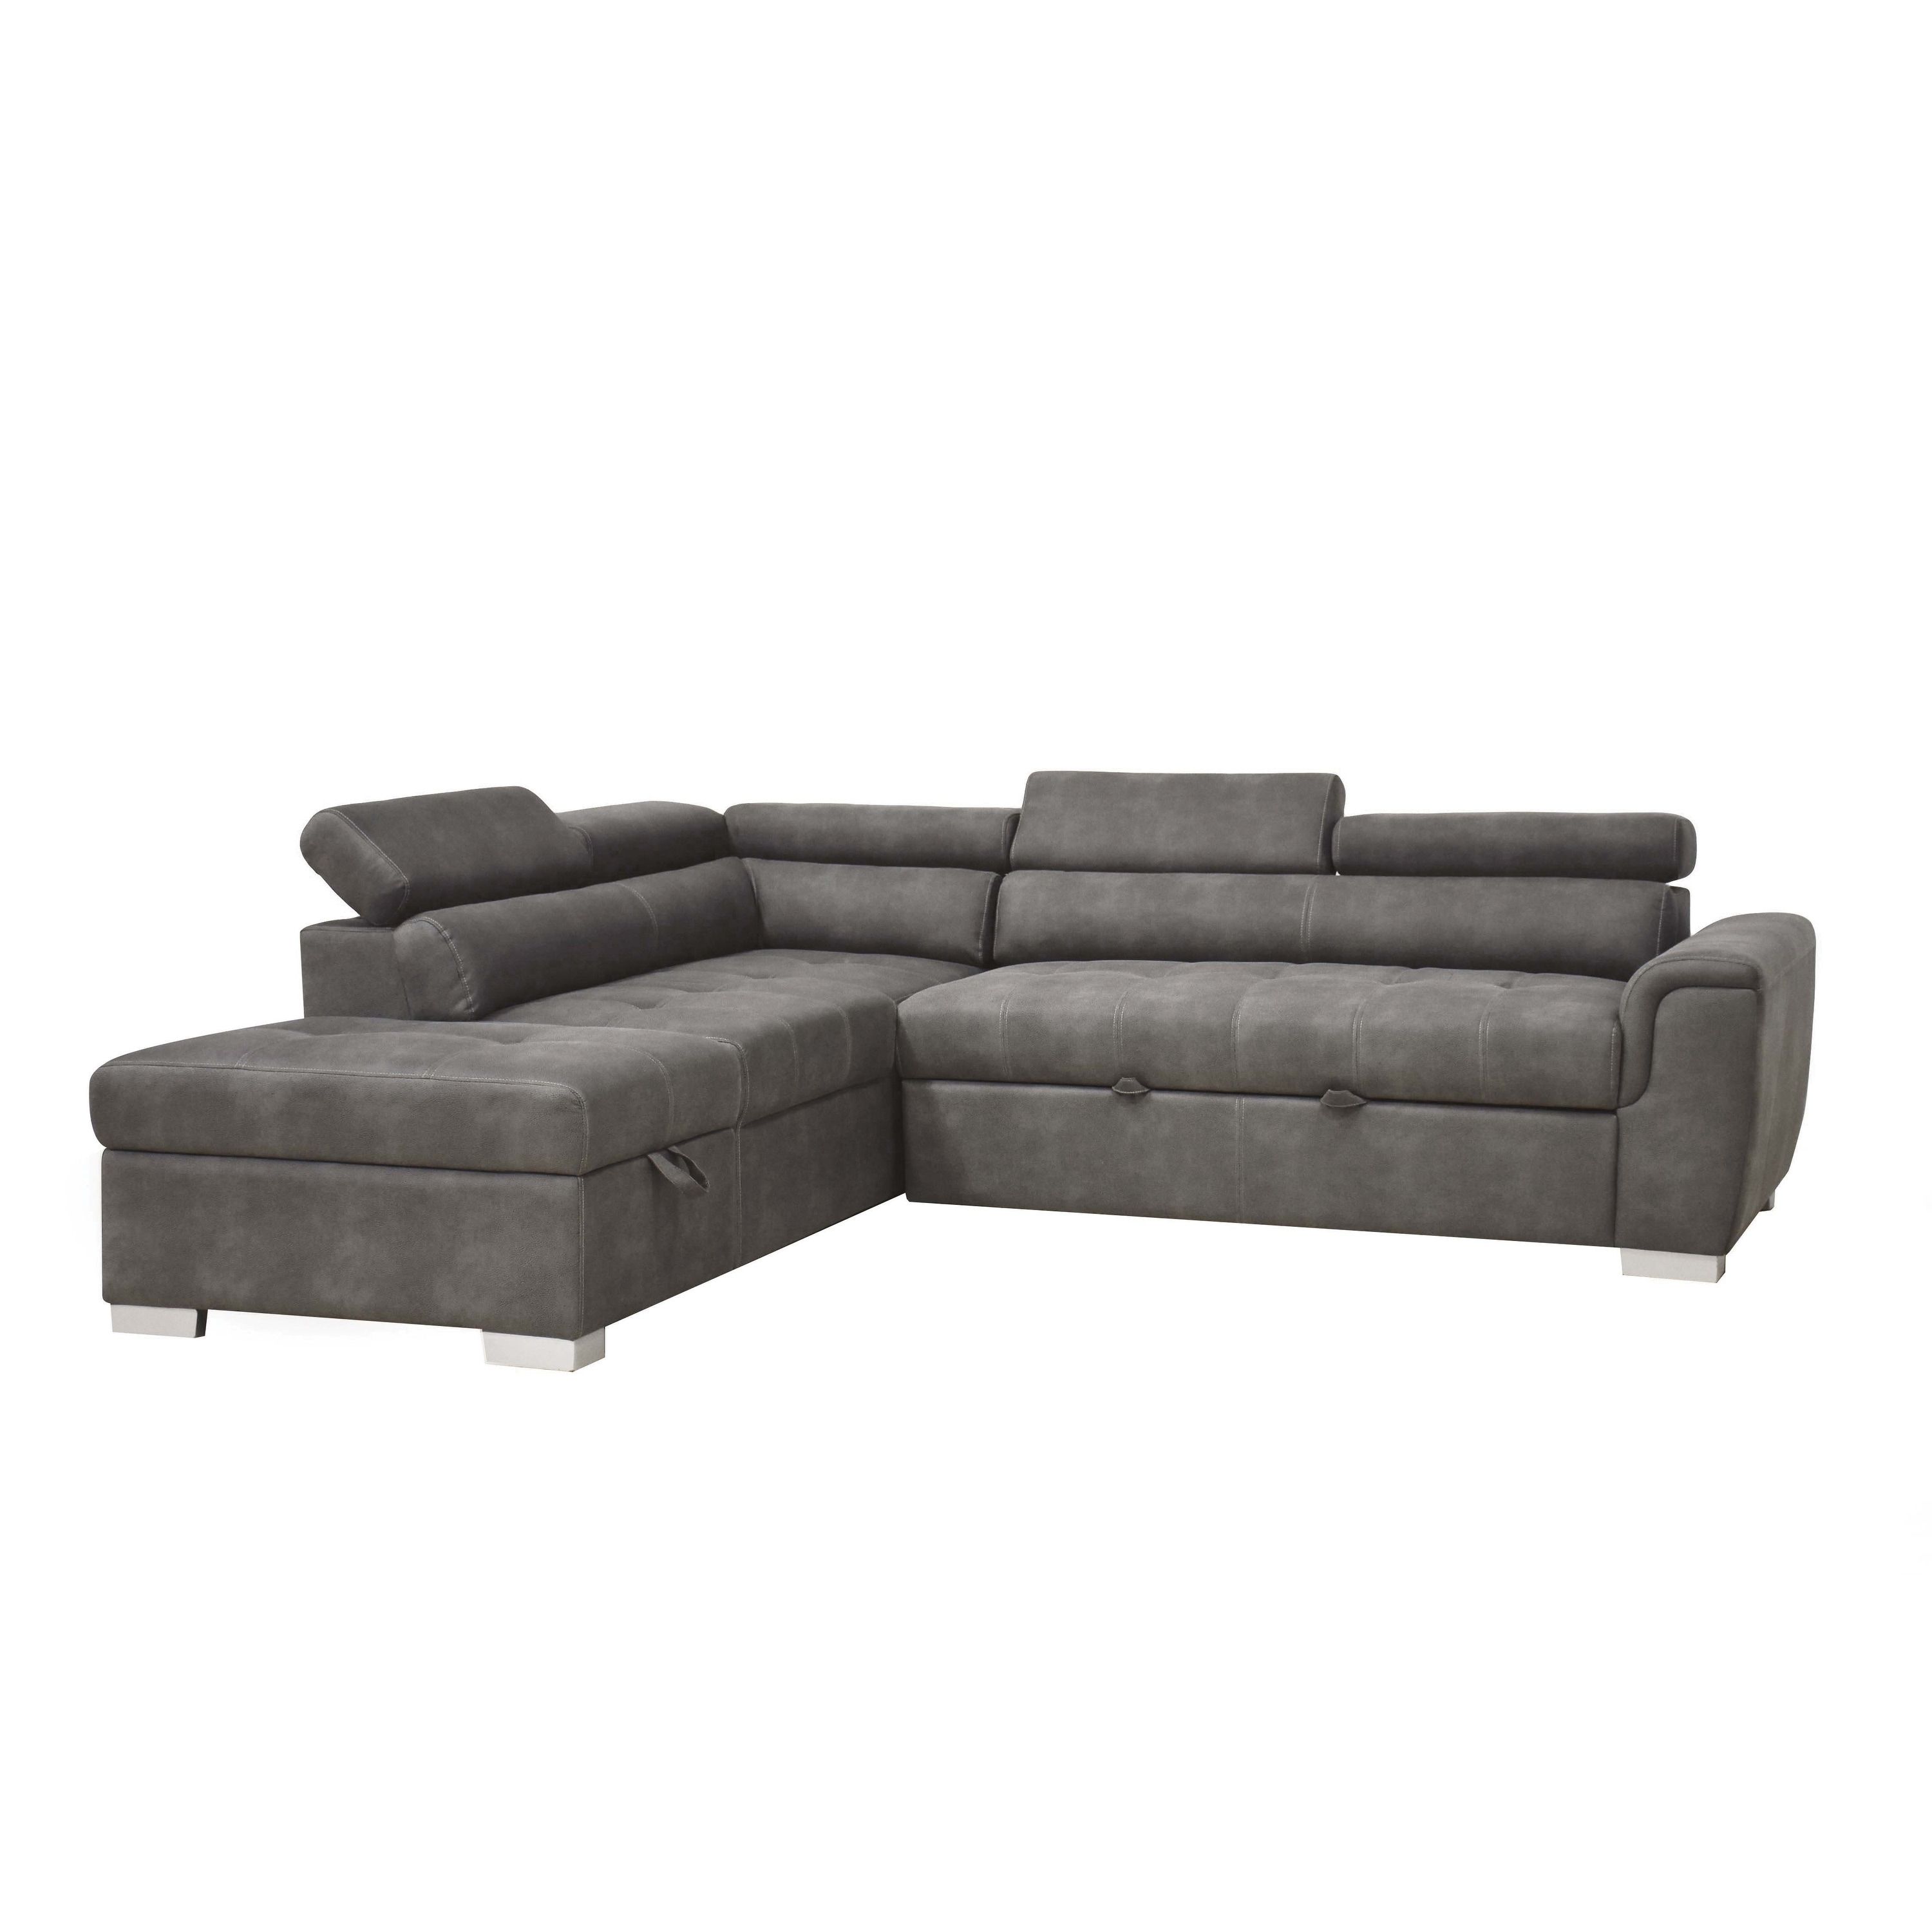 Adjustable Sectional Sofas With Queen Bed With Regard To Well Known Acme Thelma Sectional Sofa With Sleeper And Ottoman In Gray (View 16 of 20)